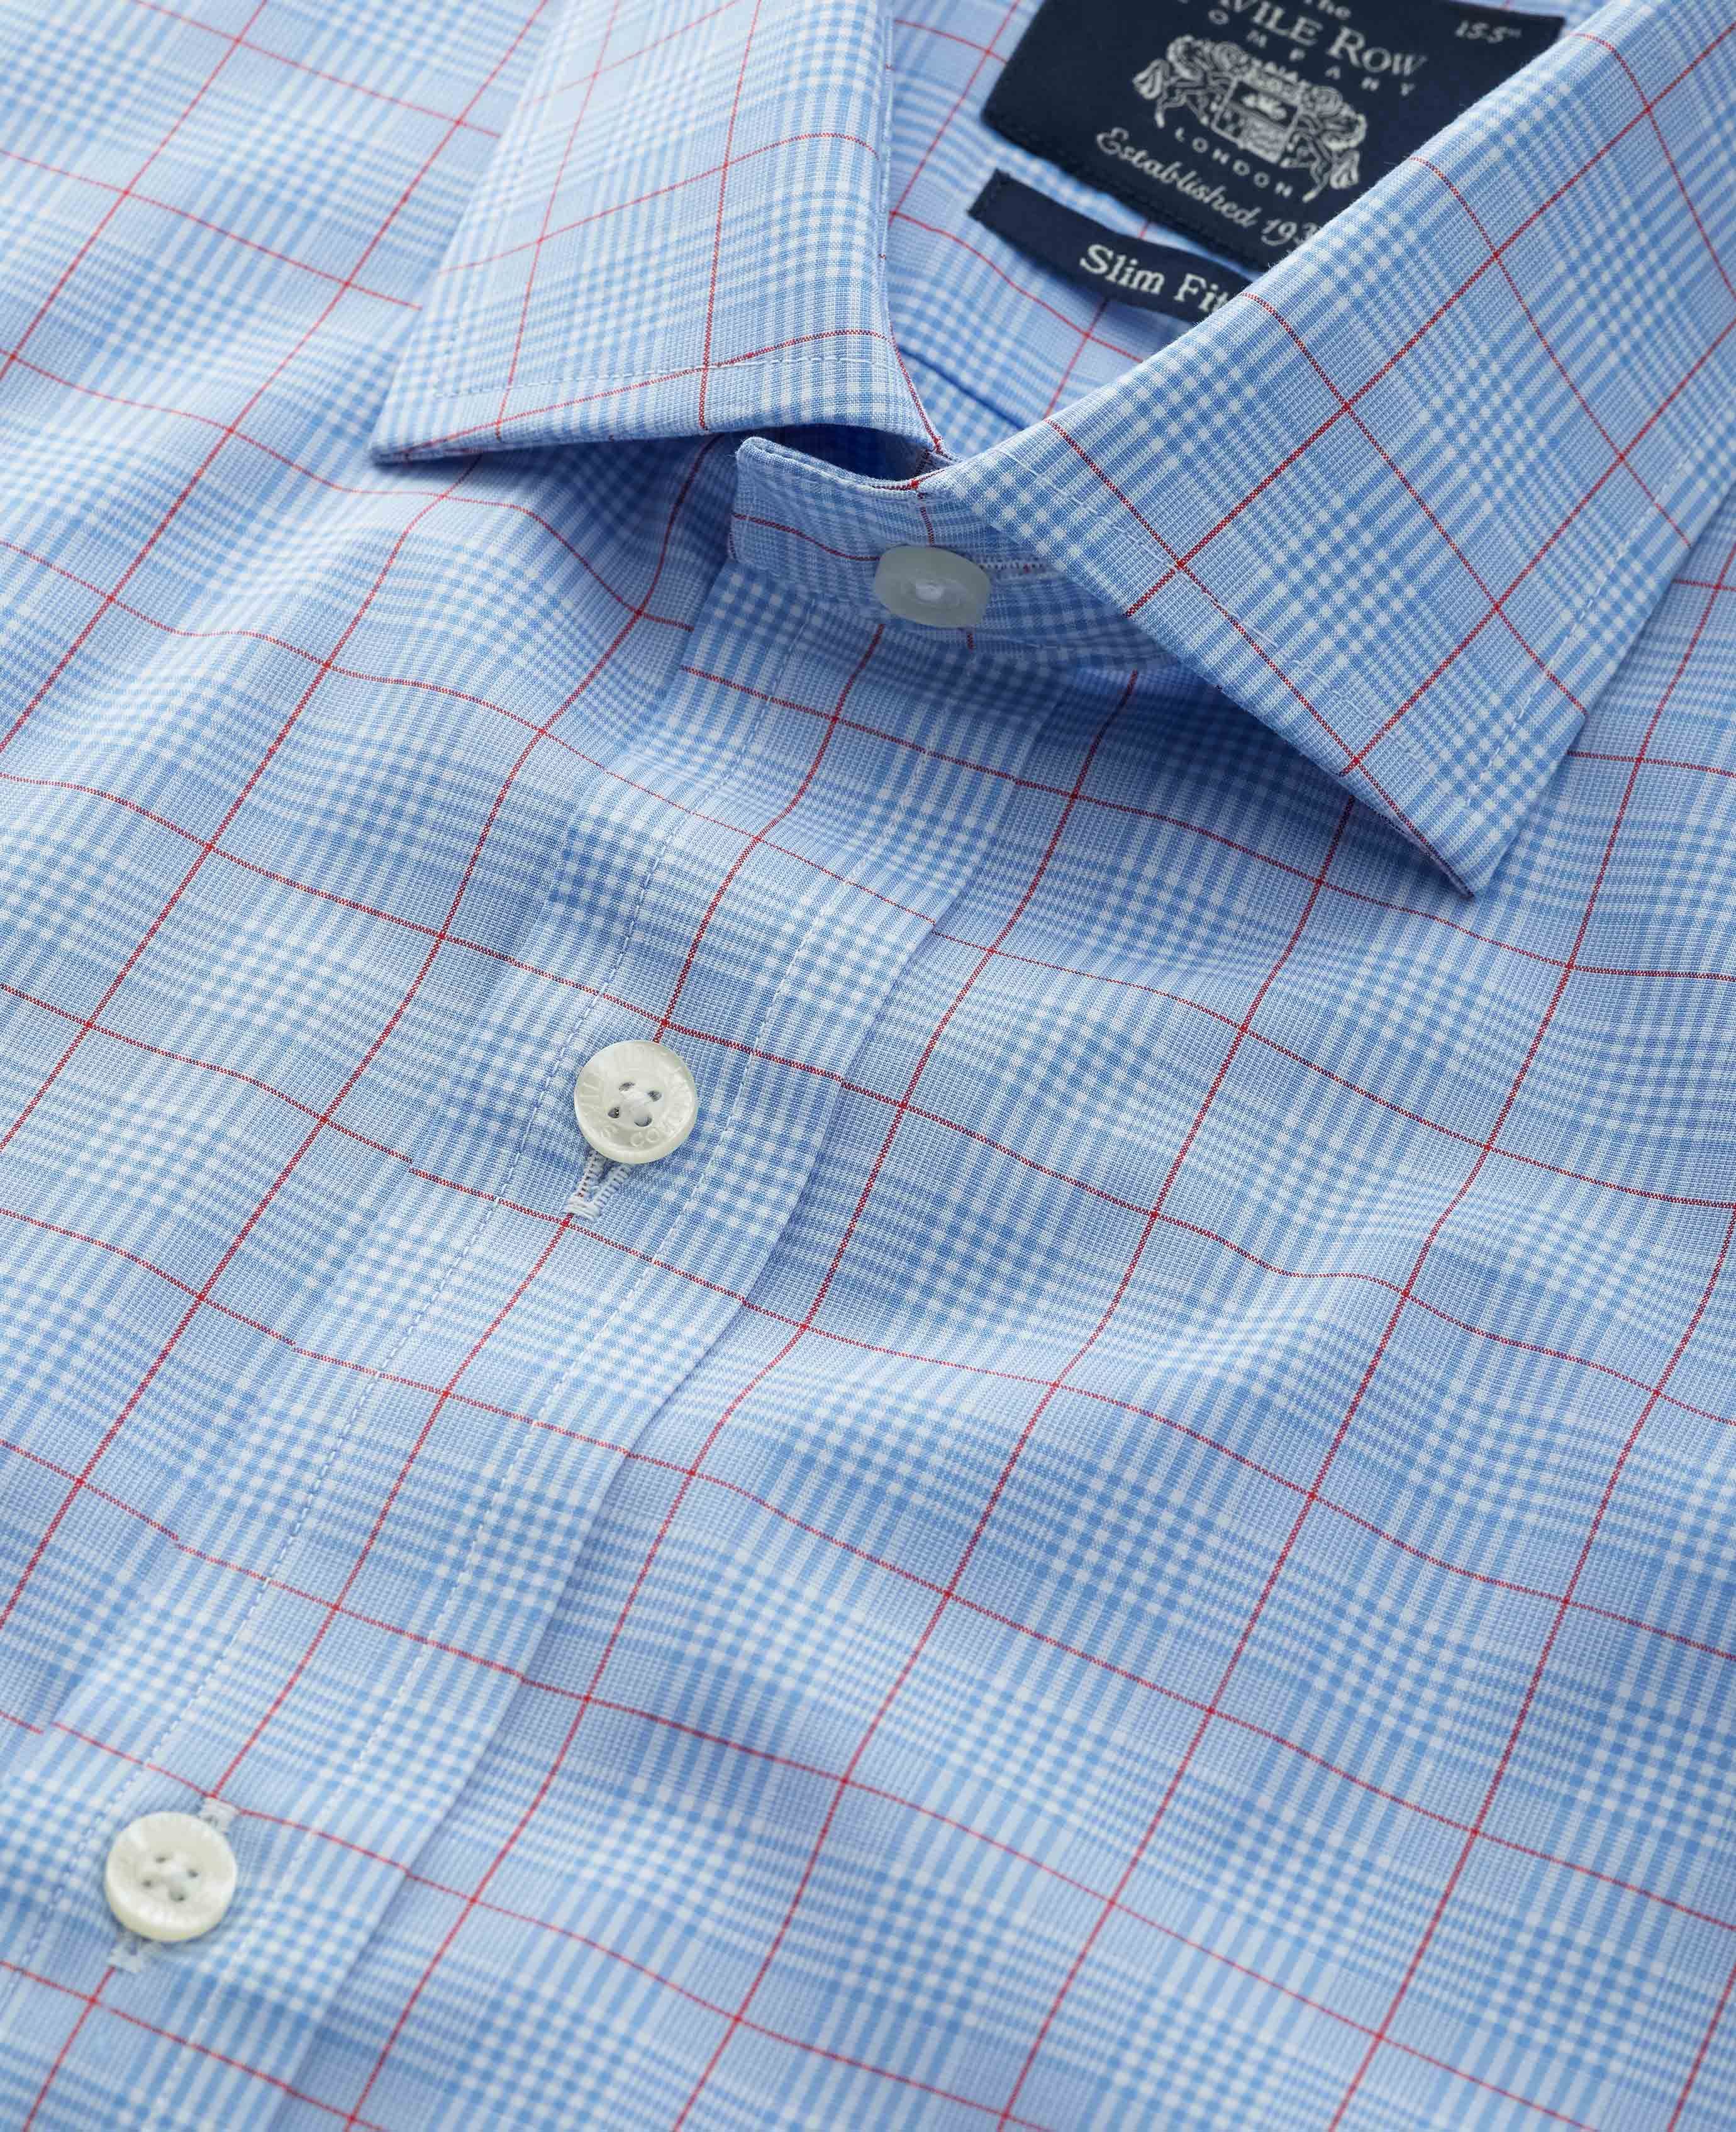 Men s Slim Fit Shirt in Blue/Red POW Check | Savile Row Co